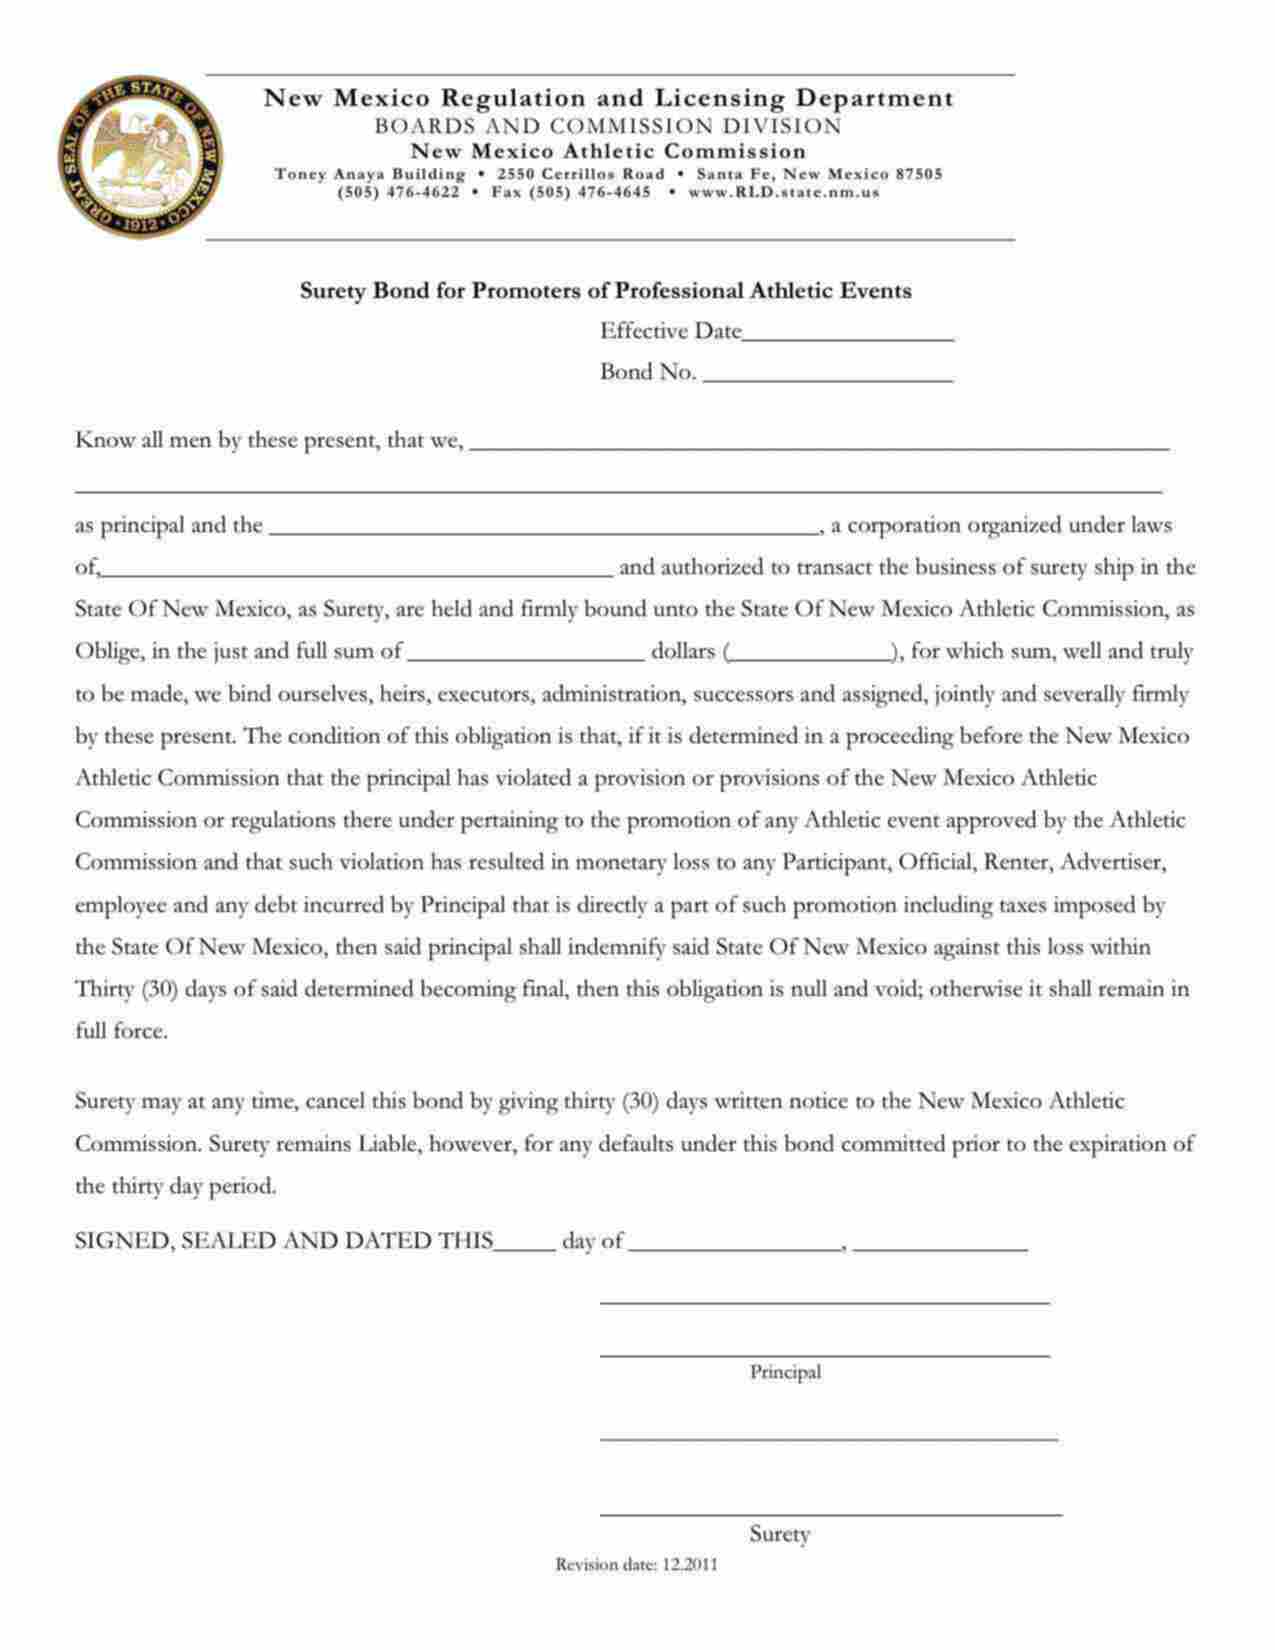 New Mexico Promoters of Professional Athletic Events Bond Form